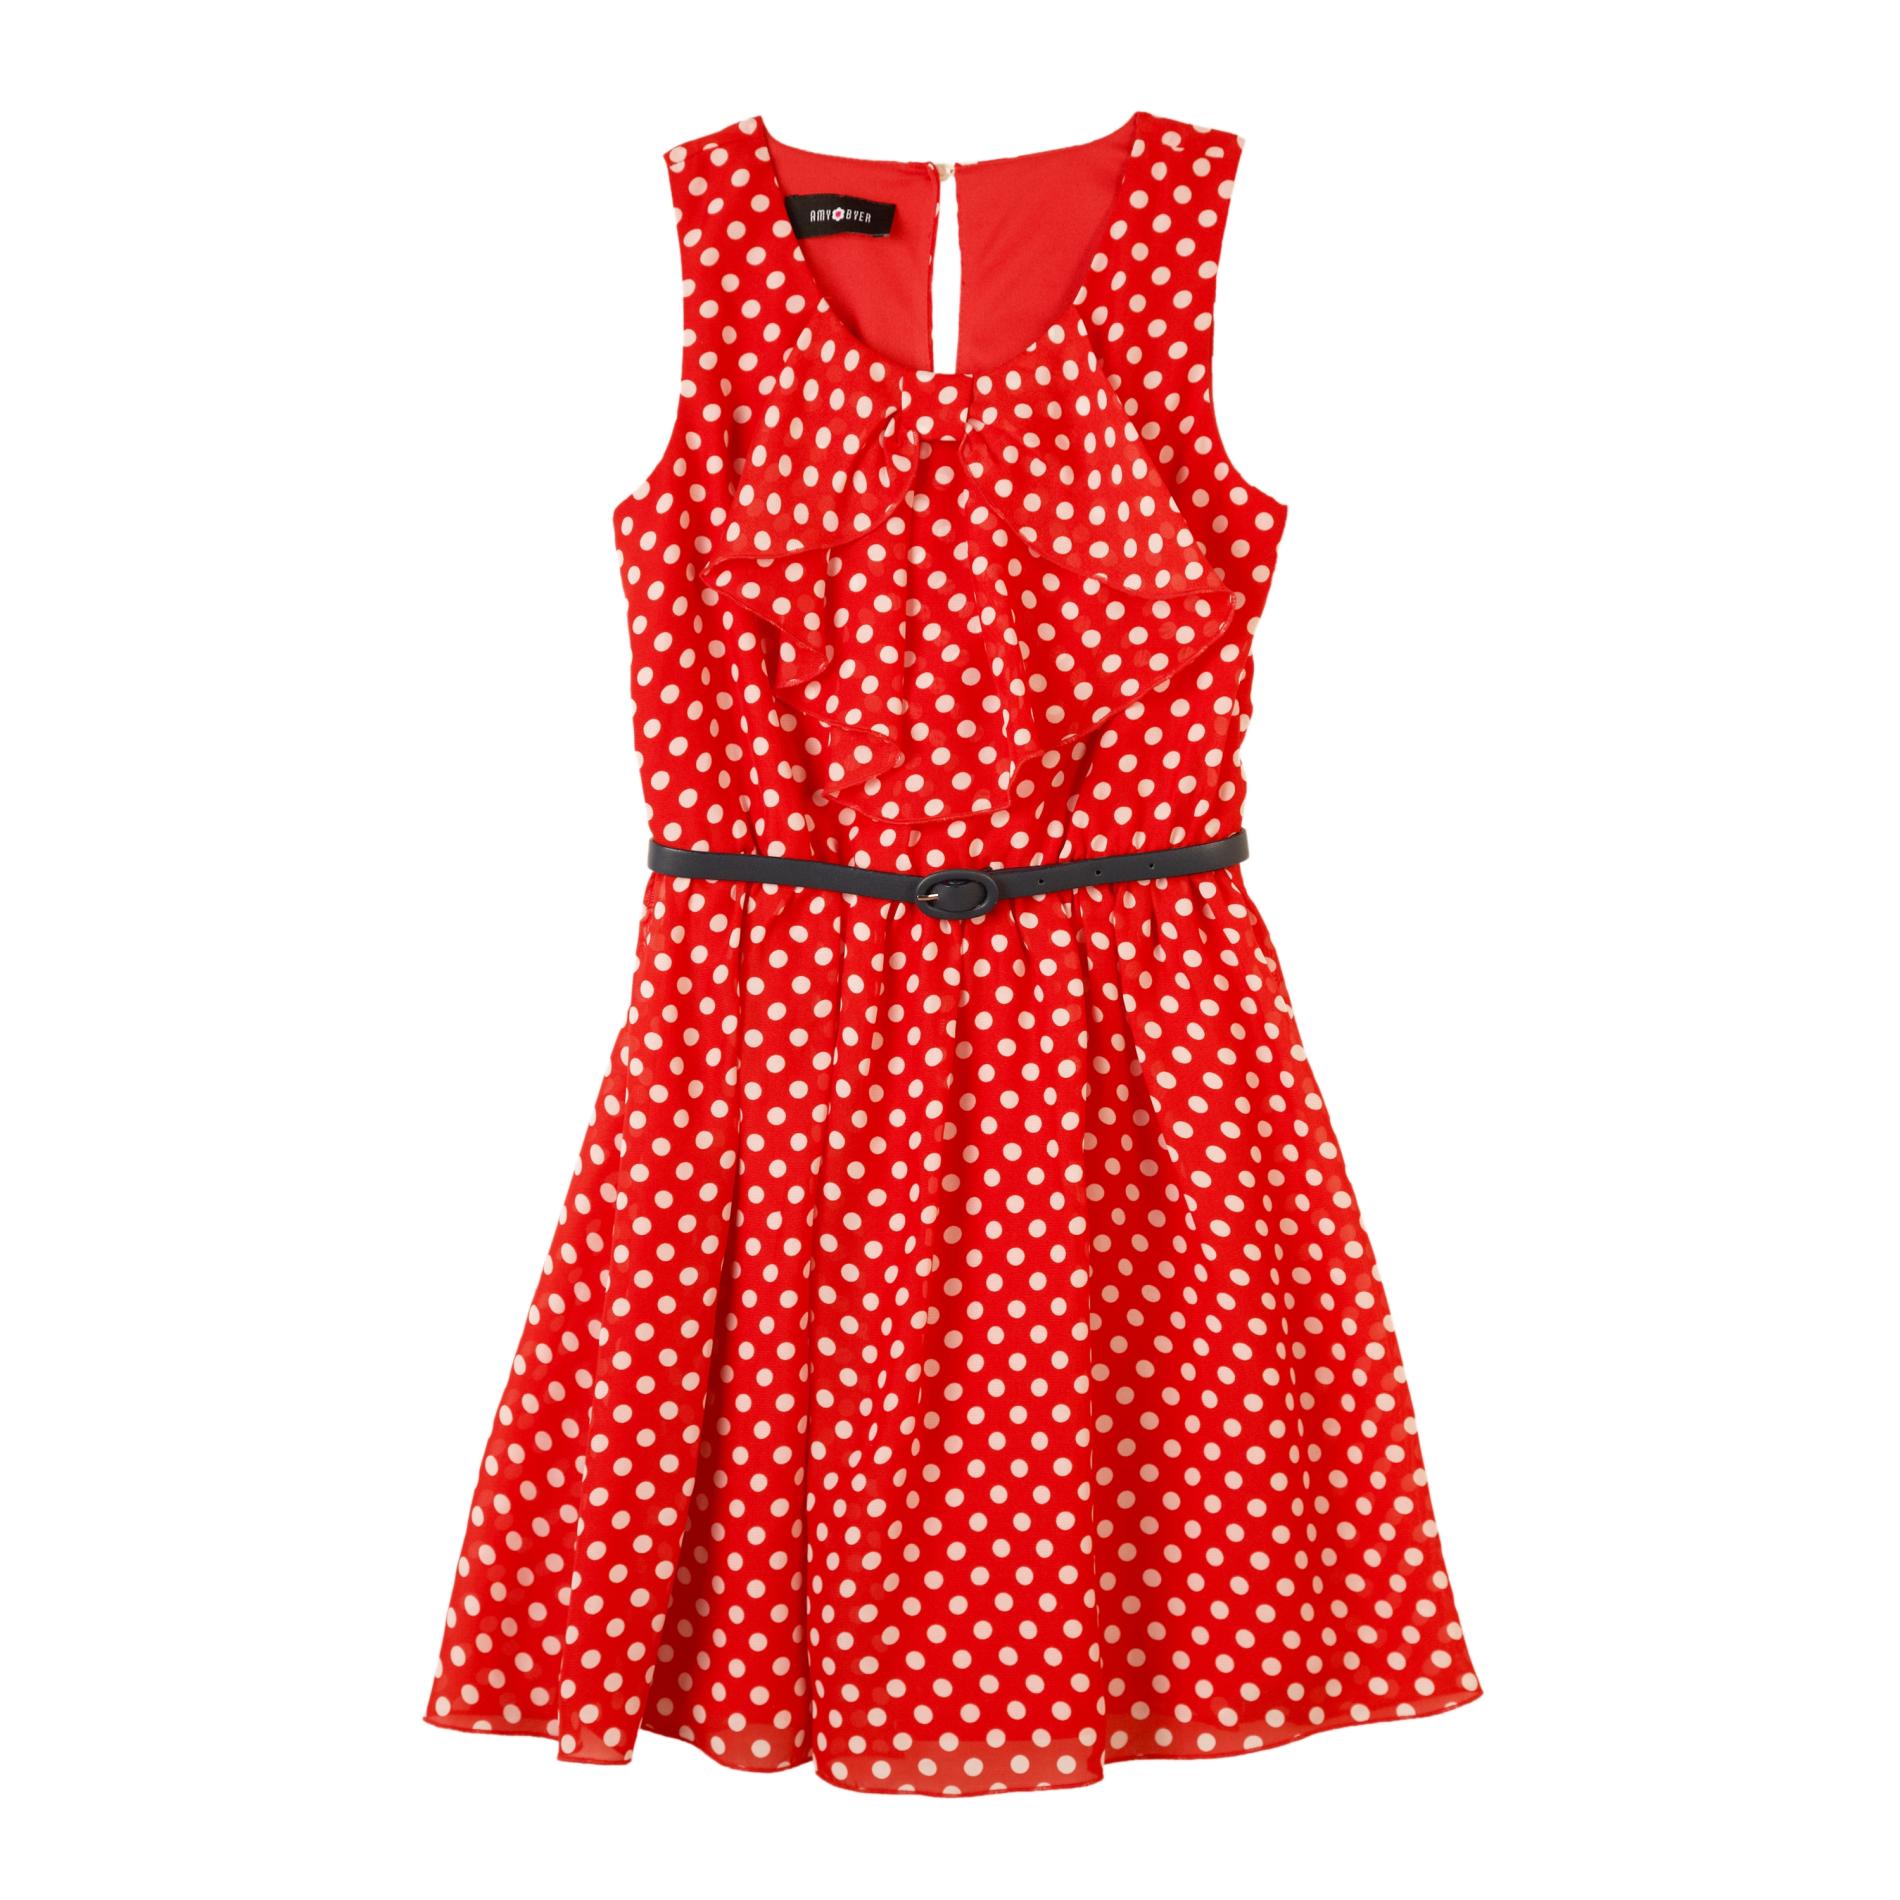 Amy's Closet Girl's Belted Waterfall Bow Dress - Polka Dots